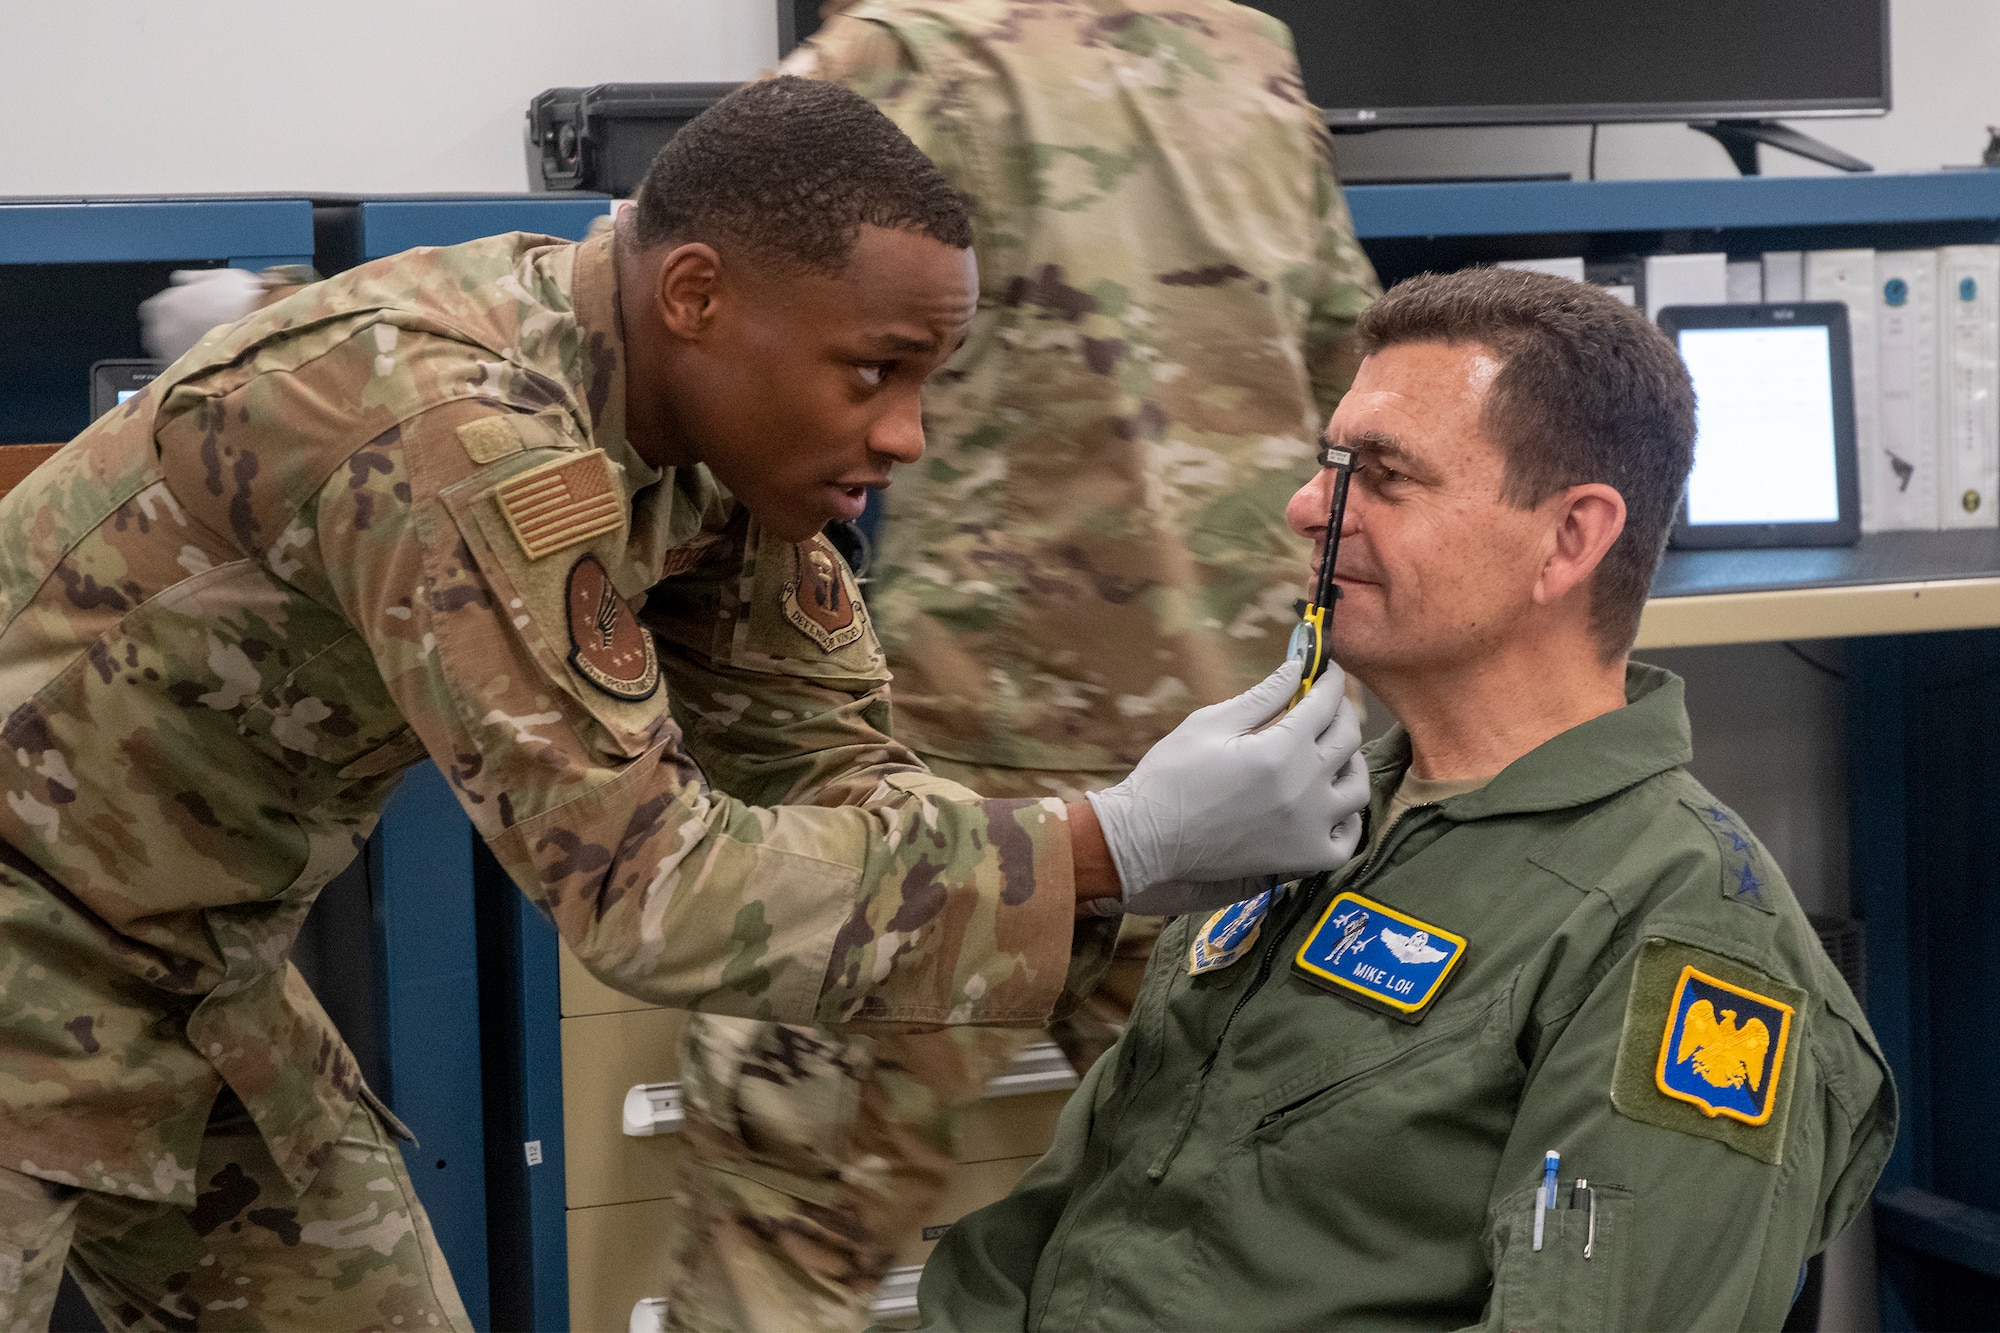 U.S. Air Force Senior Airman Anthony Ratliff, aircrew flight equipment technician with 509th Operations Support Squadron, measures Air National Guard Director Lt. Gen. Michael Loh for a helmet during his visit to Whiteman Air Force Base, Missouri, May 13, 2022. Loh visited the Missouri Air National Guard's 131st Bomb Wing to learn about the total force B-2 Spirit stealth bomber mission. (U.S. Air National Guard photo by Master Sgt. John E. Hillier)